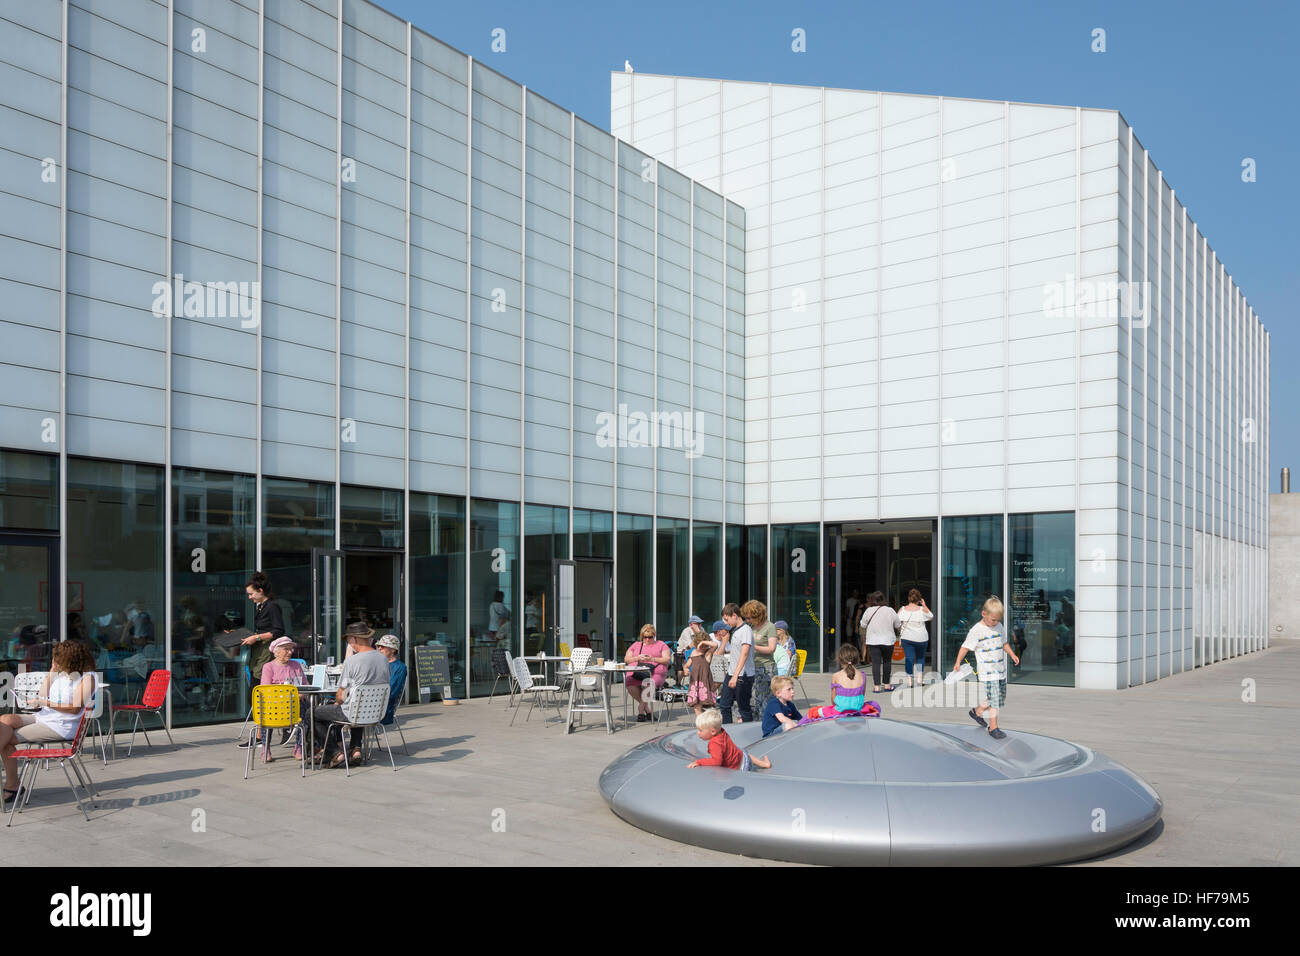 Turner Contemporary Gallery, le Rendezvous, Margate, Kent, Angleterre, Royaume-Uni Banque D'Images